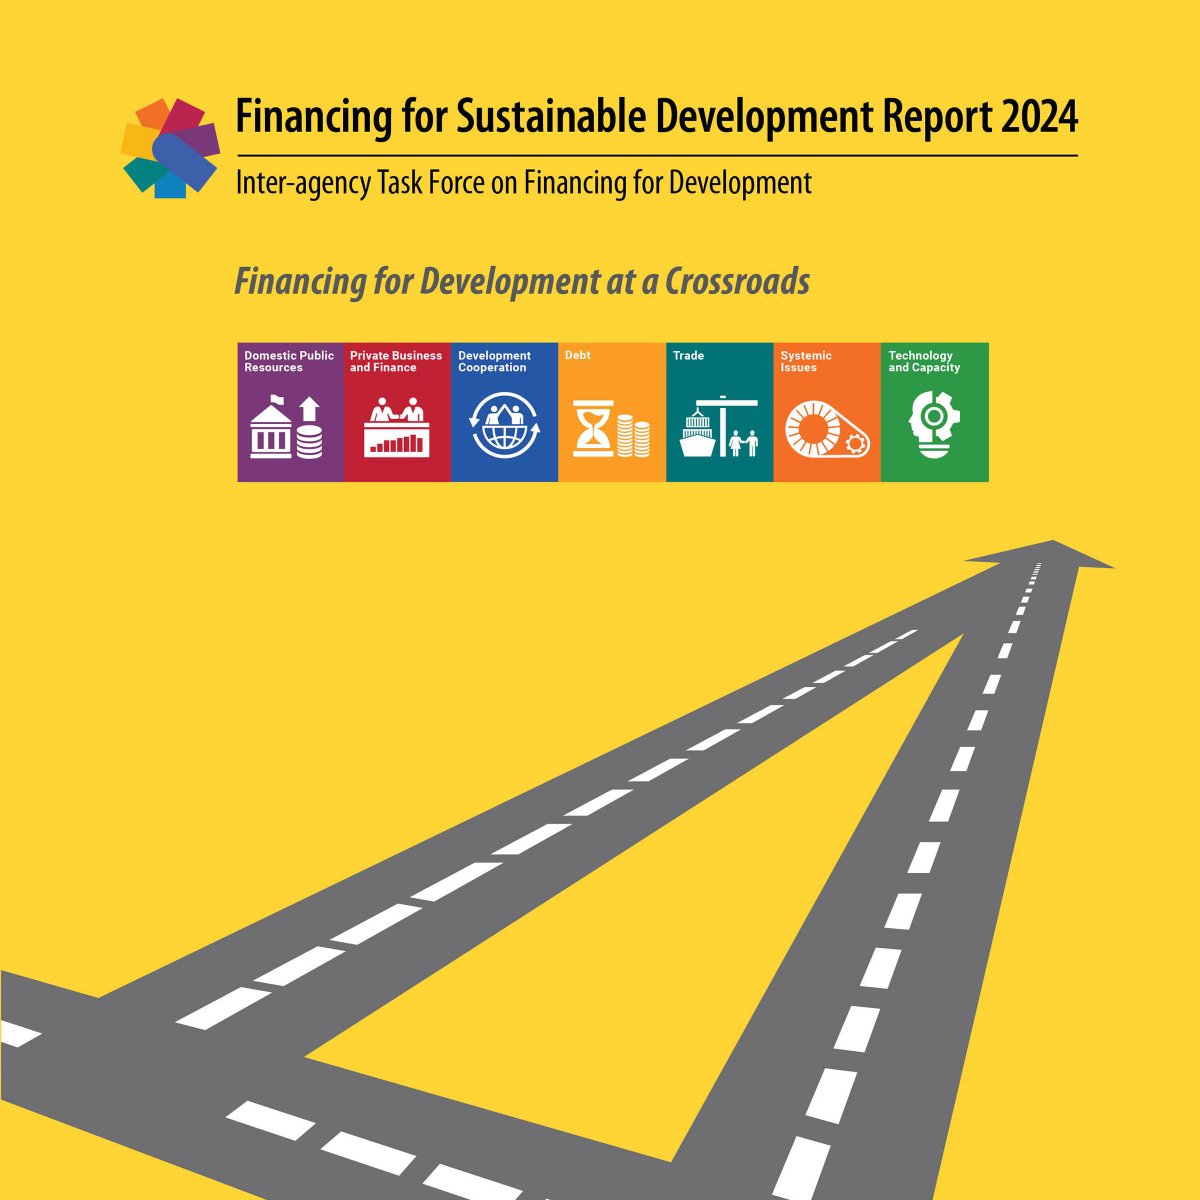 The world must close a sustainable development financing gap of over $4 trillion annually. Addressing climate change and eradicating poverty are major challenges that require unprecedented investments. ➡️ Learn about closing the gap: bit.ly/FSDR2024 #FinancingOurFuture